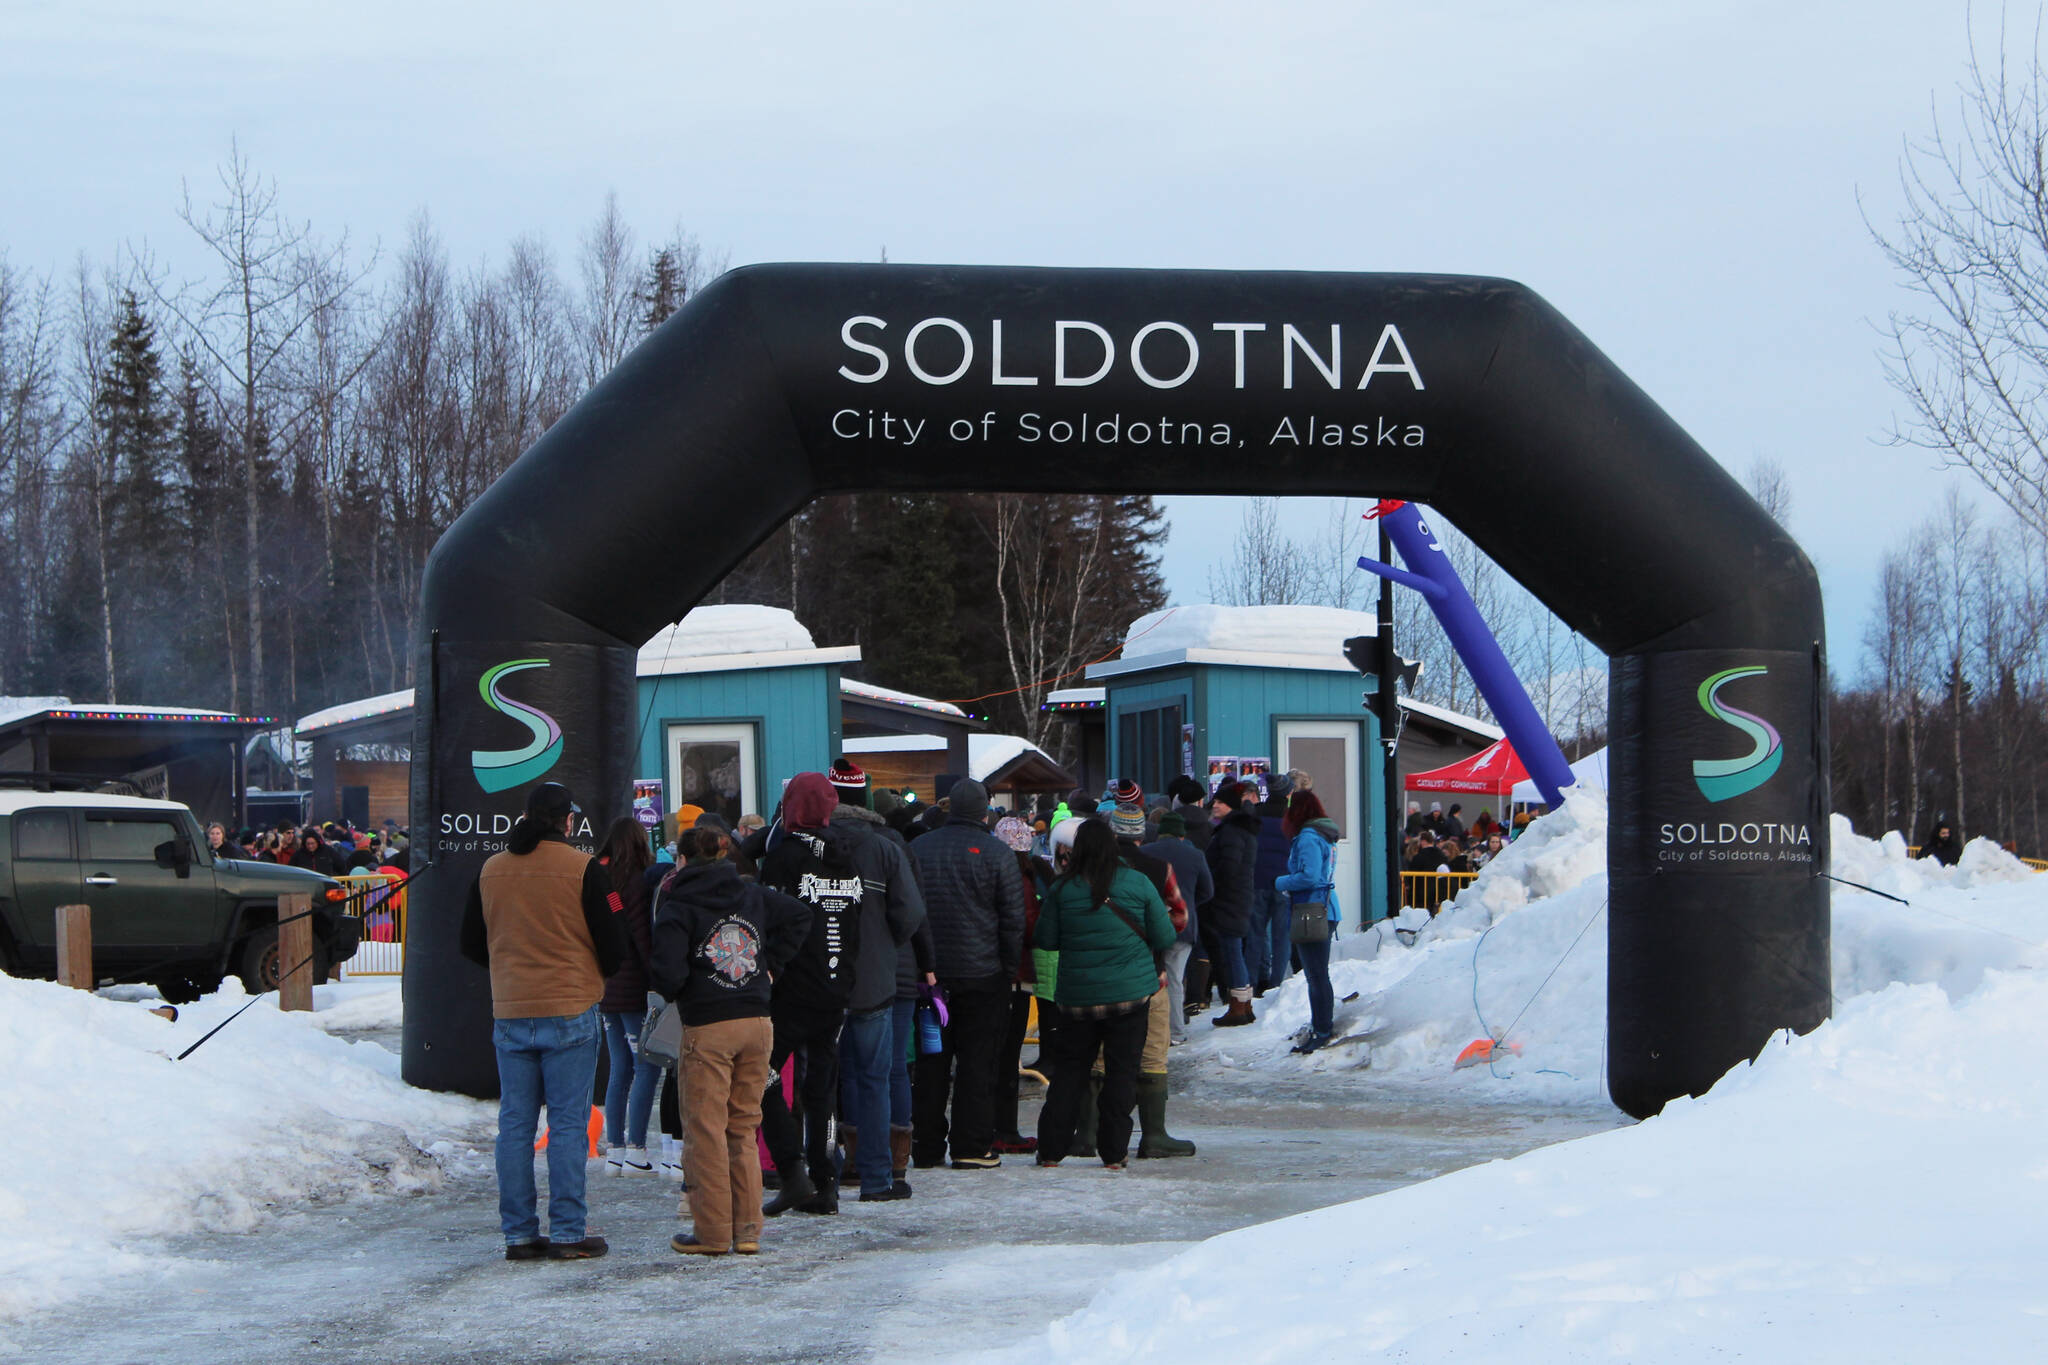 A line gathers at the entrance to Frozen RiverFest on Saturday, Feb. 19, 2022 in Soldotna, Alaska. (Ashlyn O’Hara/Peninsula Clarion)